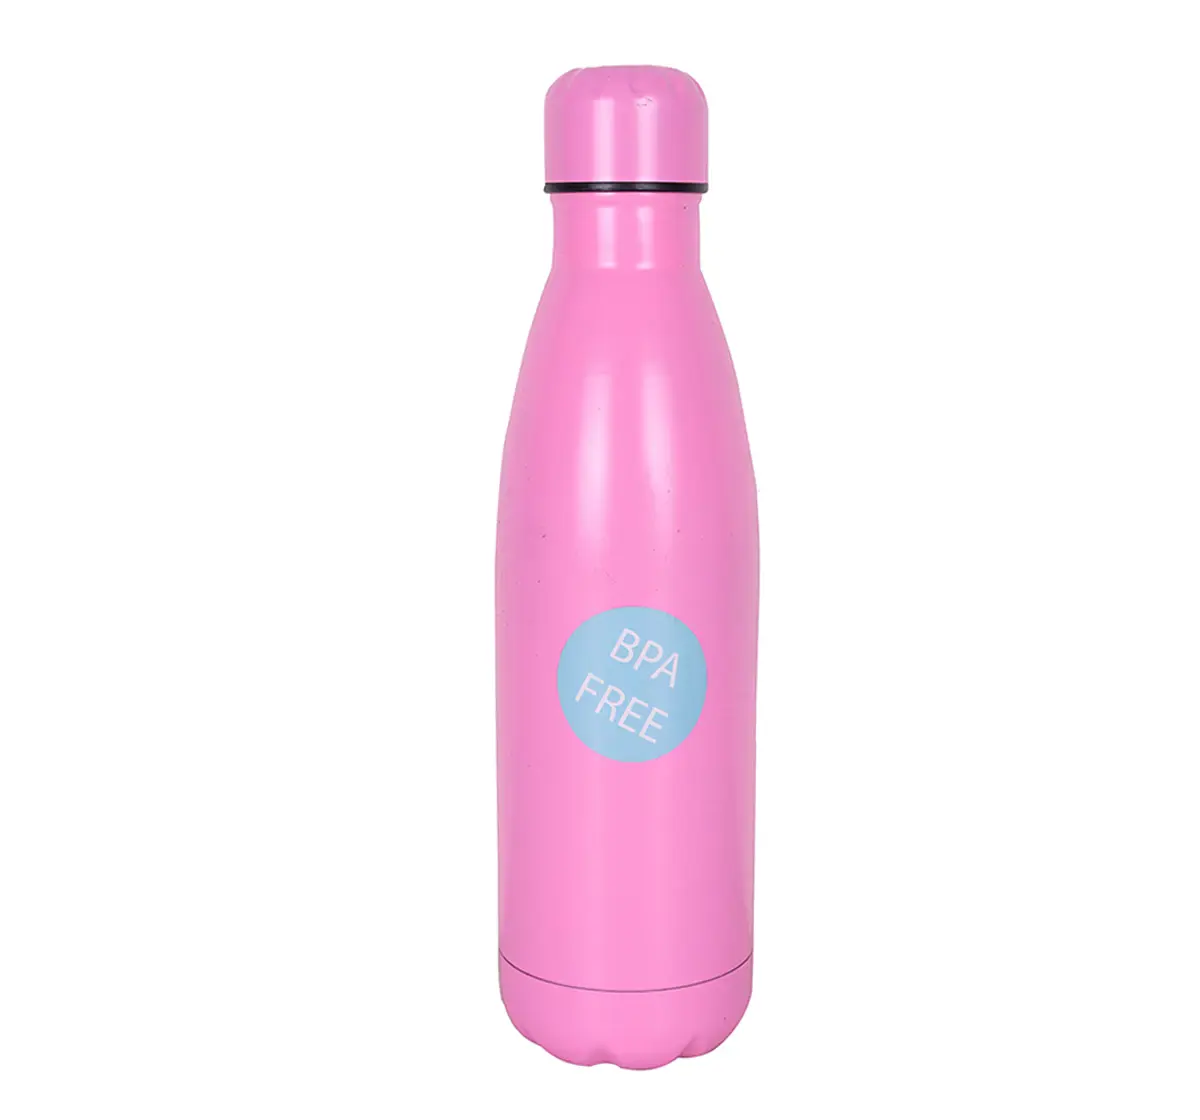 Stainless Steel Insulated Water Bottle by Hamster London for Kids, Pink, Non-Toxic, BPA Free, 500ml, 5Y+